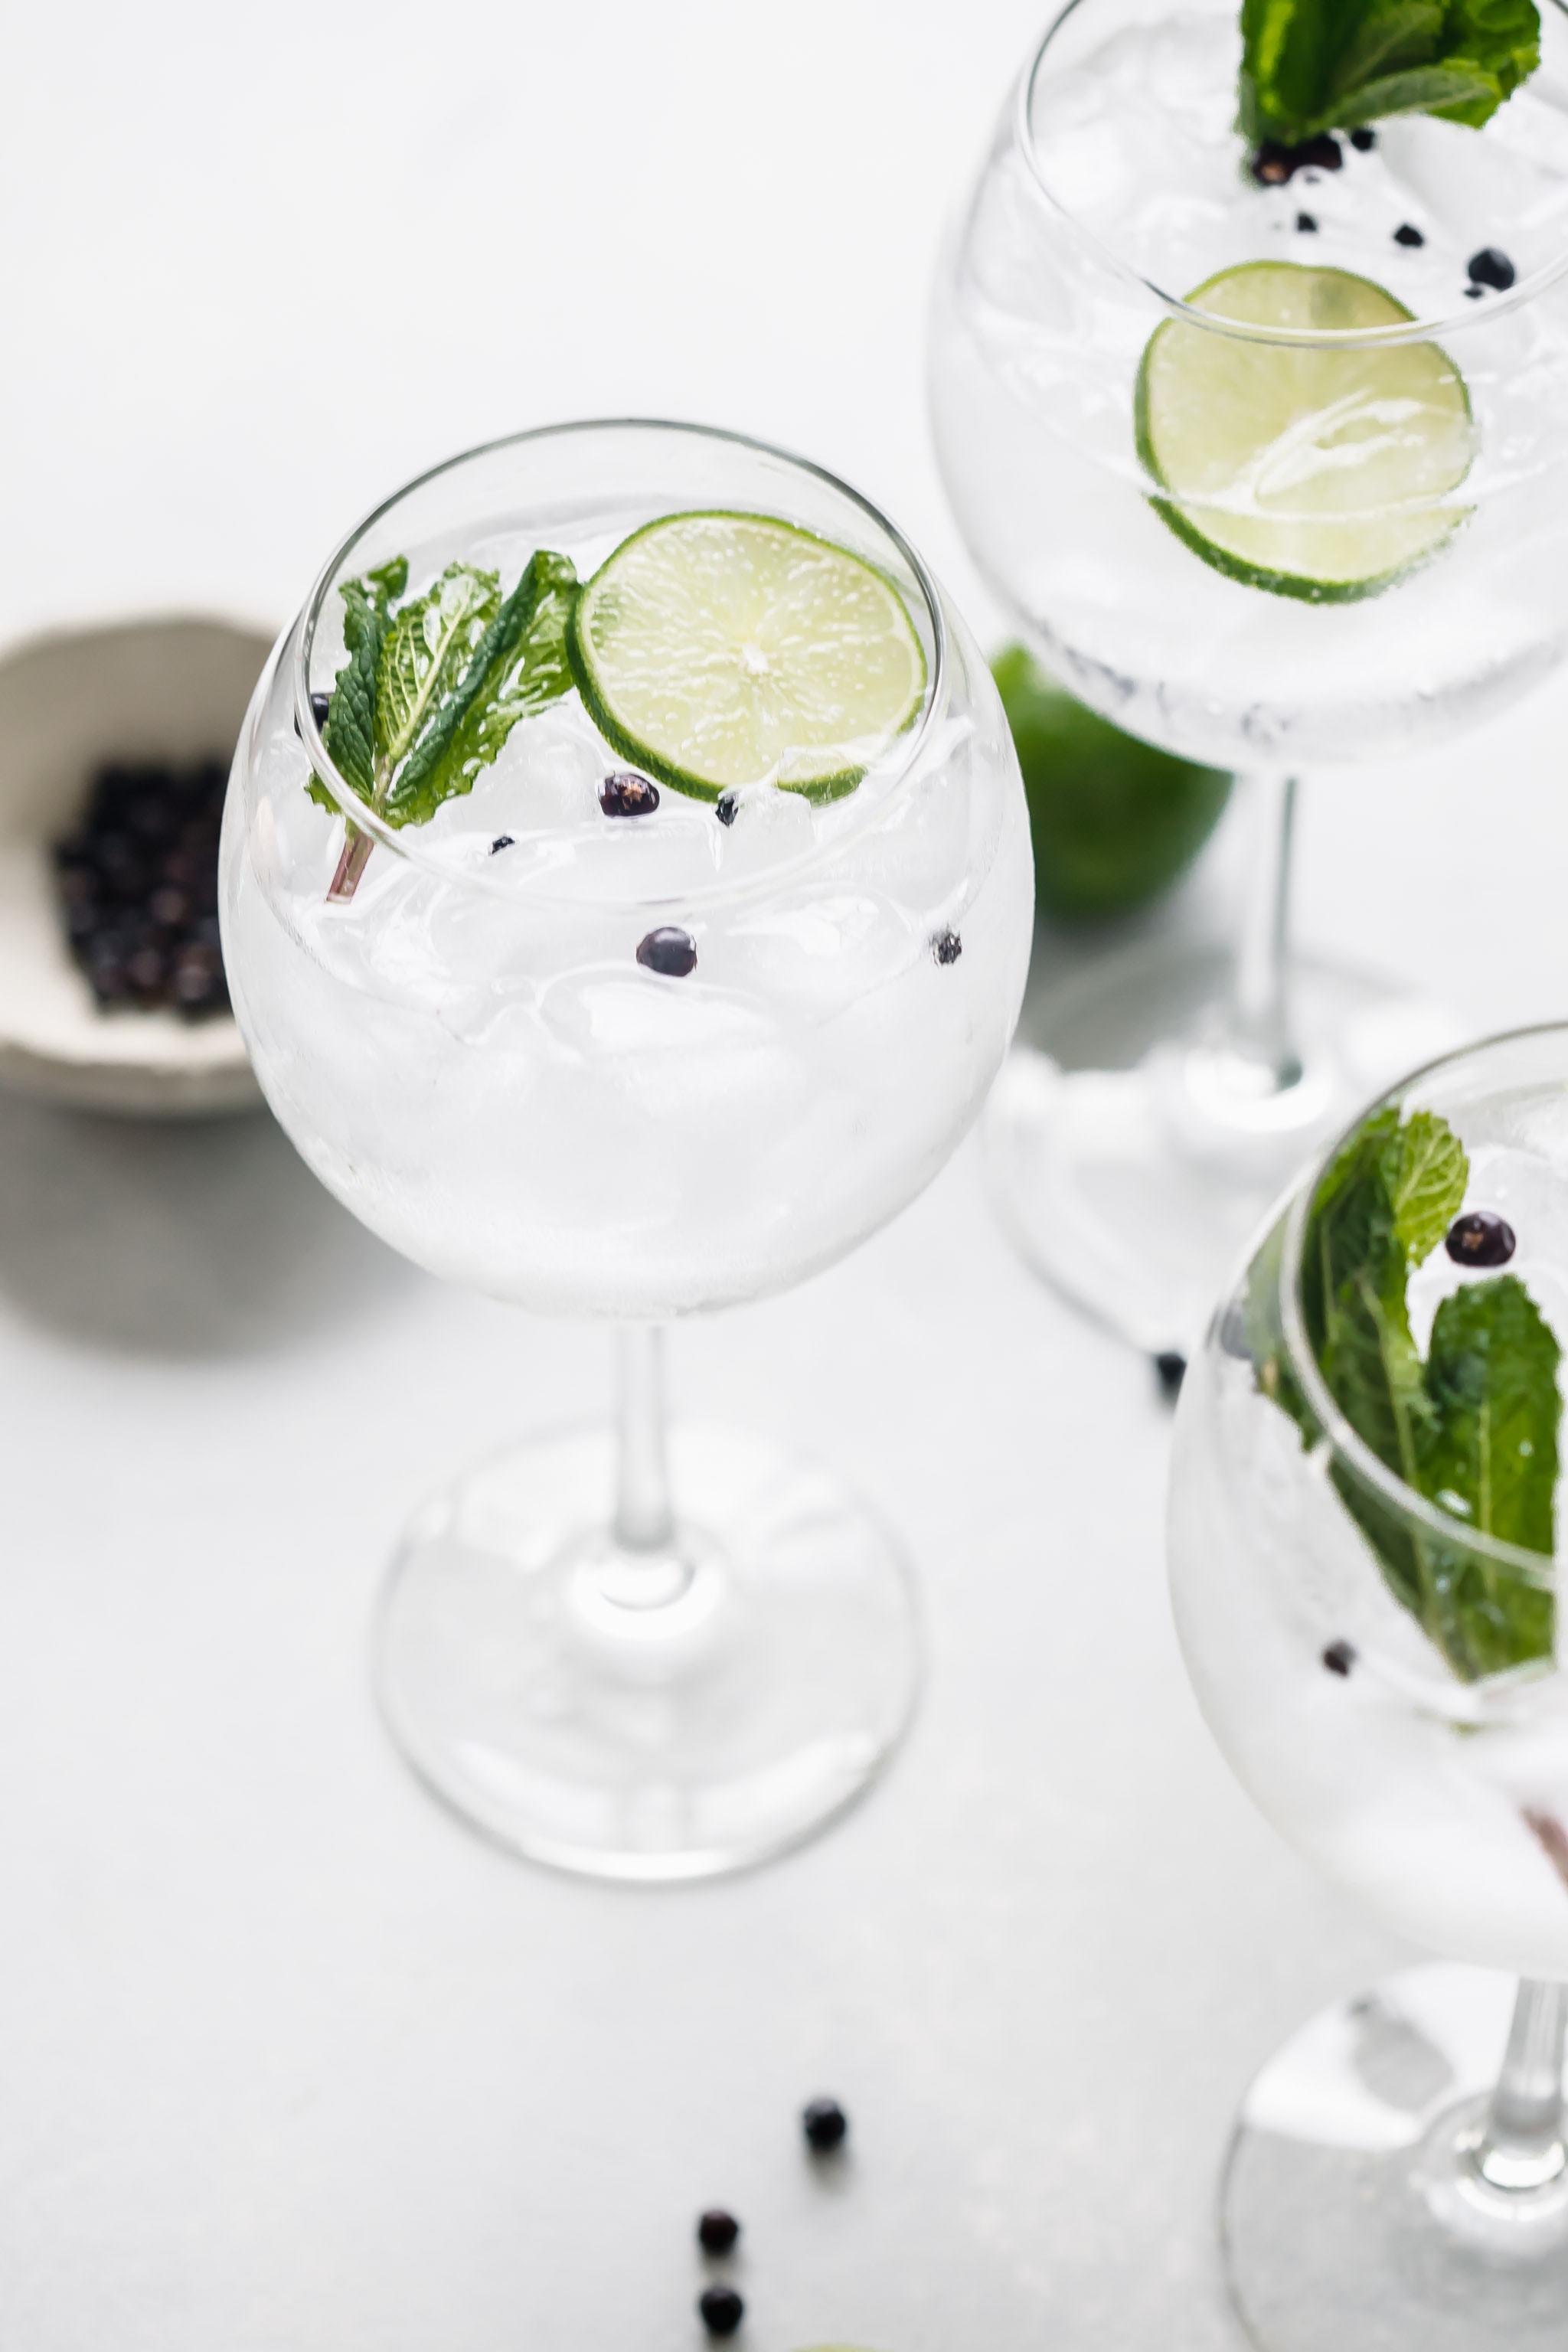 Three glasses of gin tonic cocktail garnished with limes and mint.